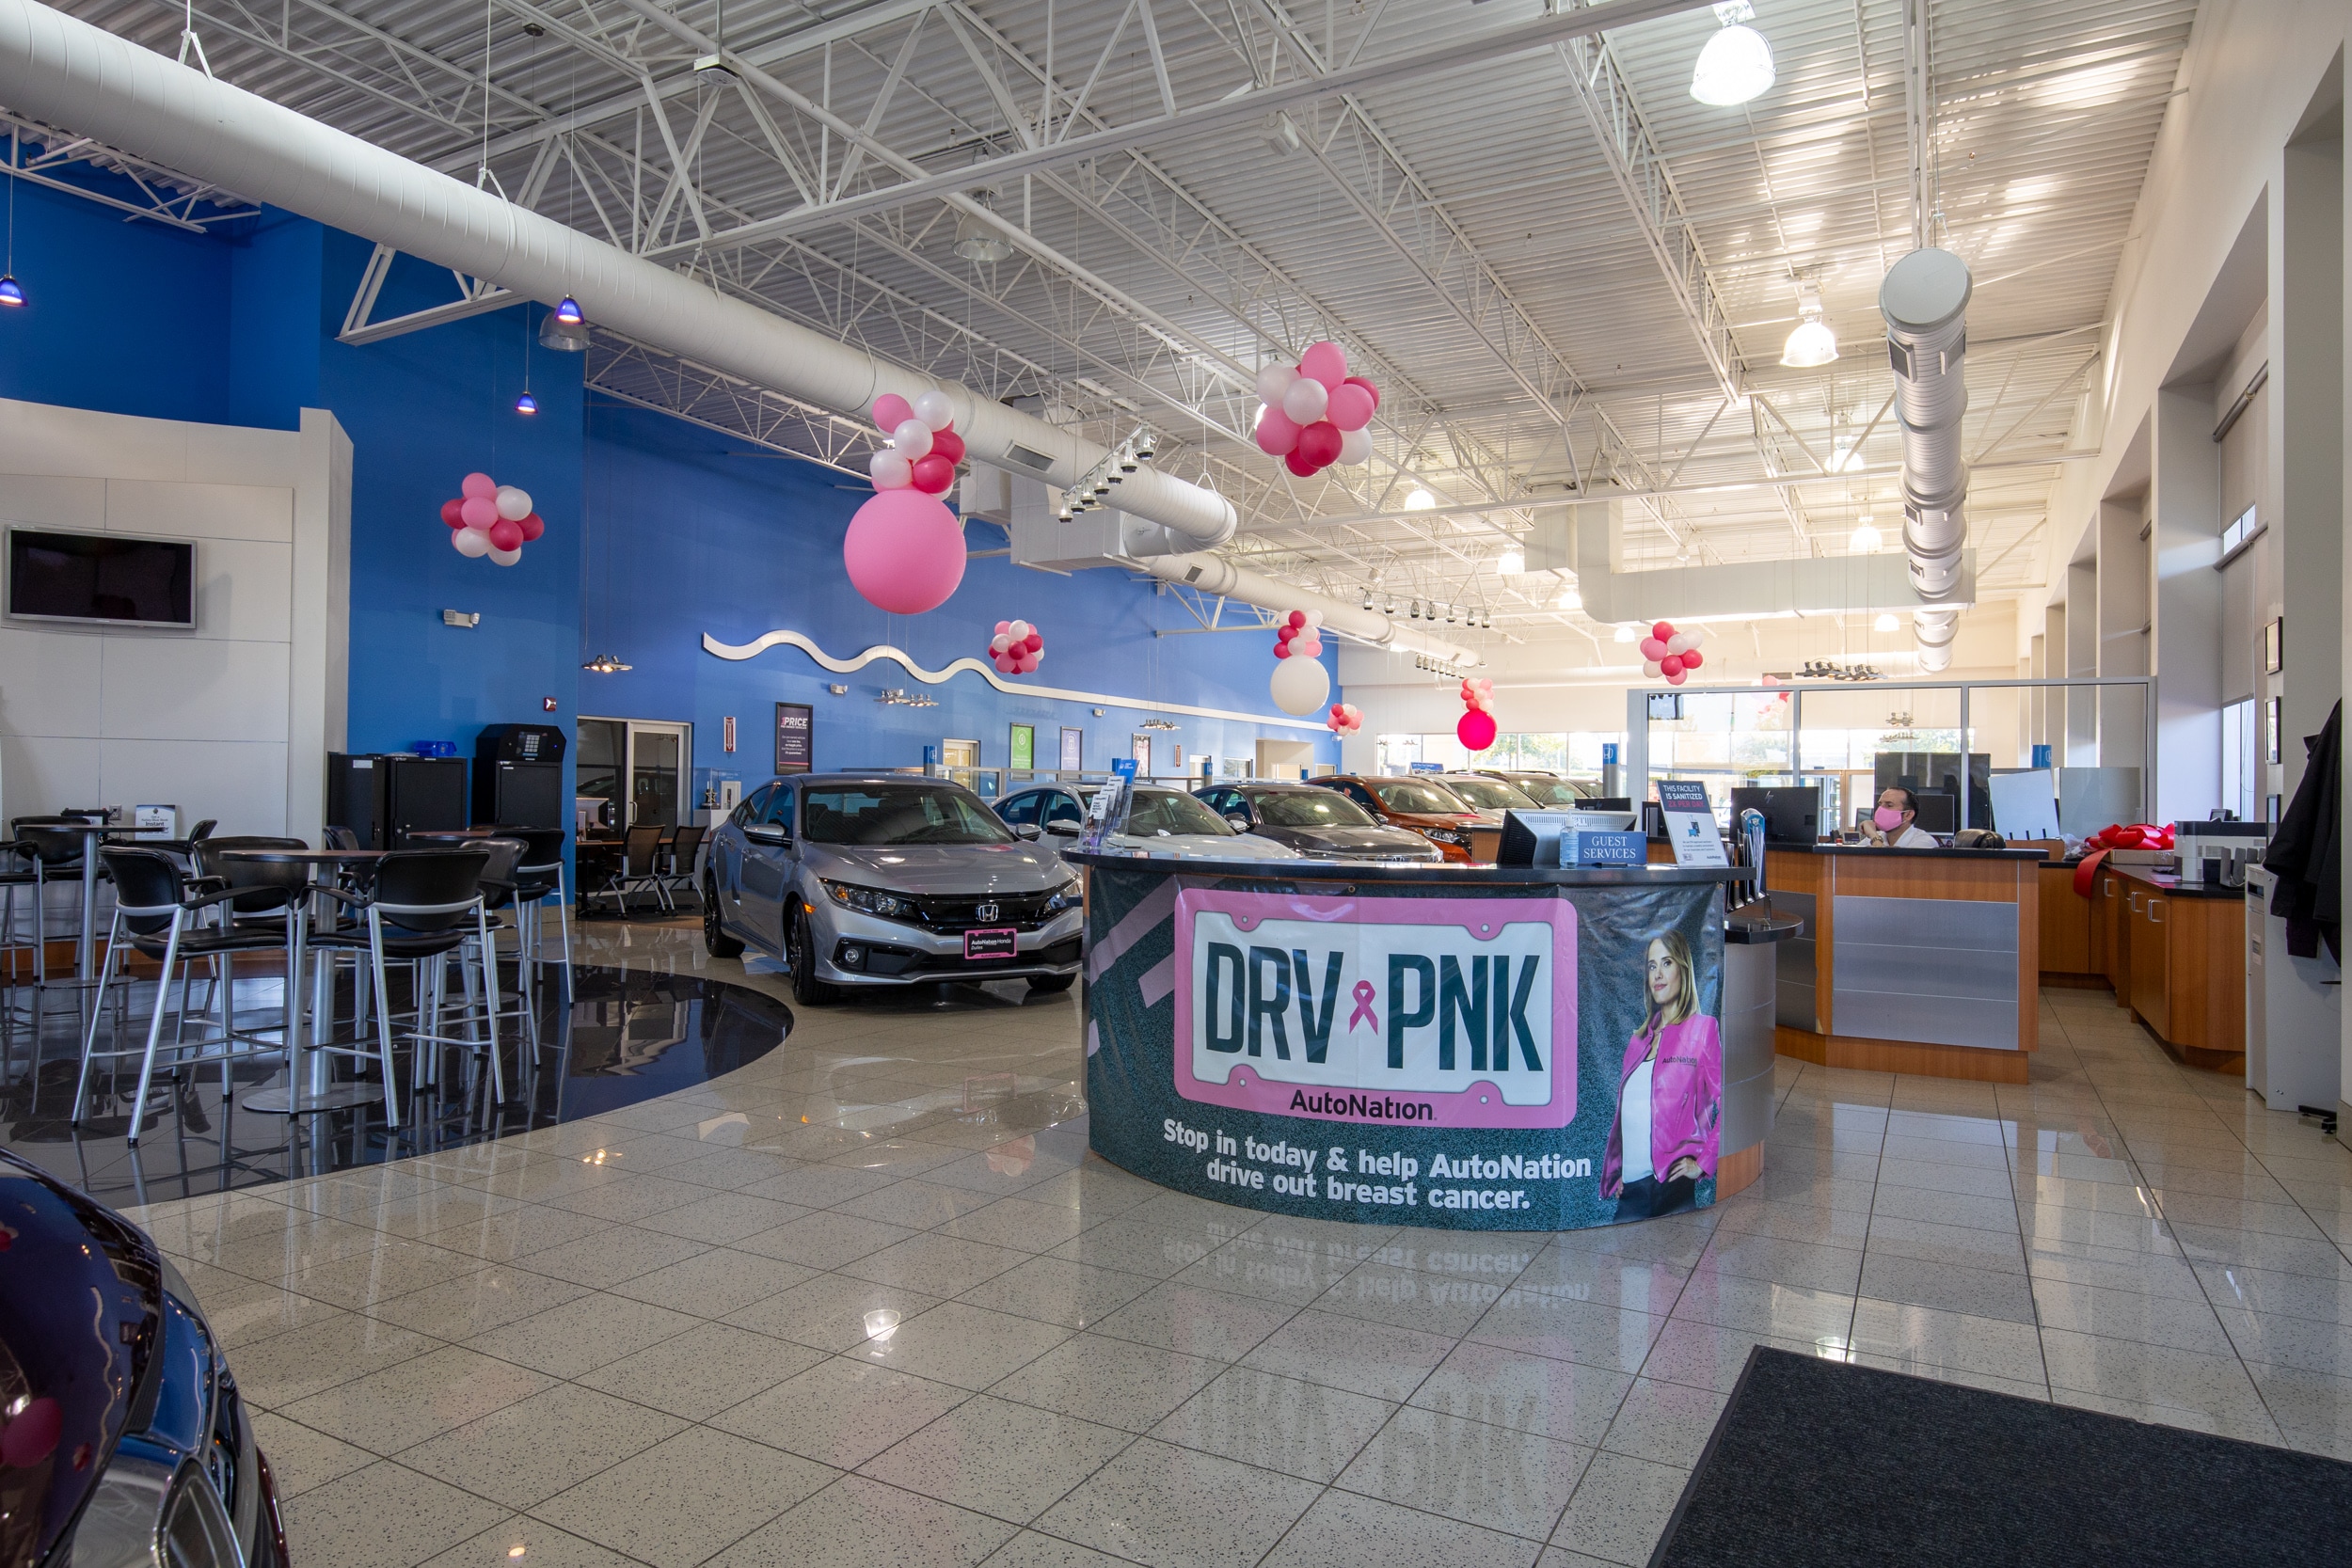 Interior view of AutoNation Honda Dulles with several vehicles parked inside along with multiple round tables and chairs.